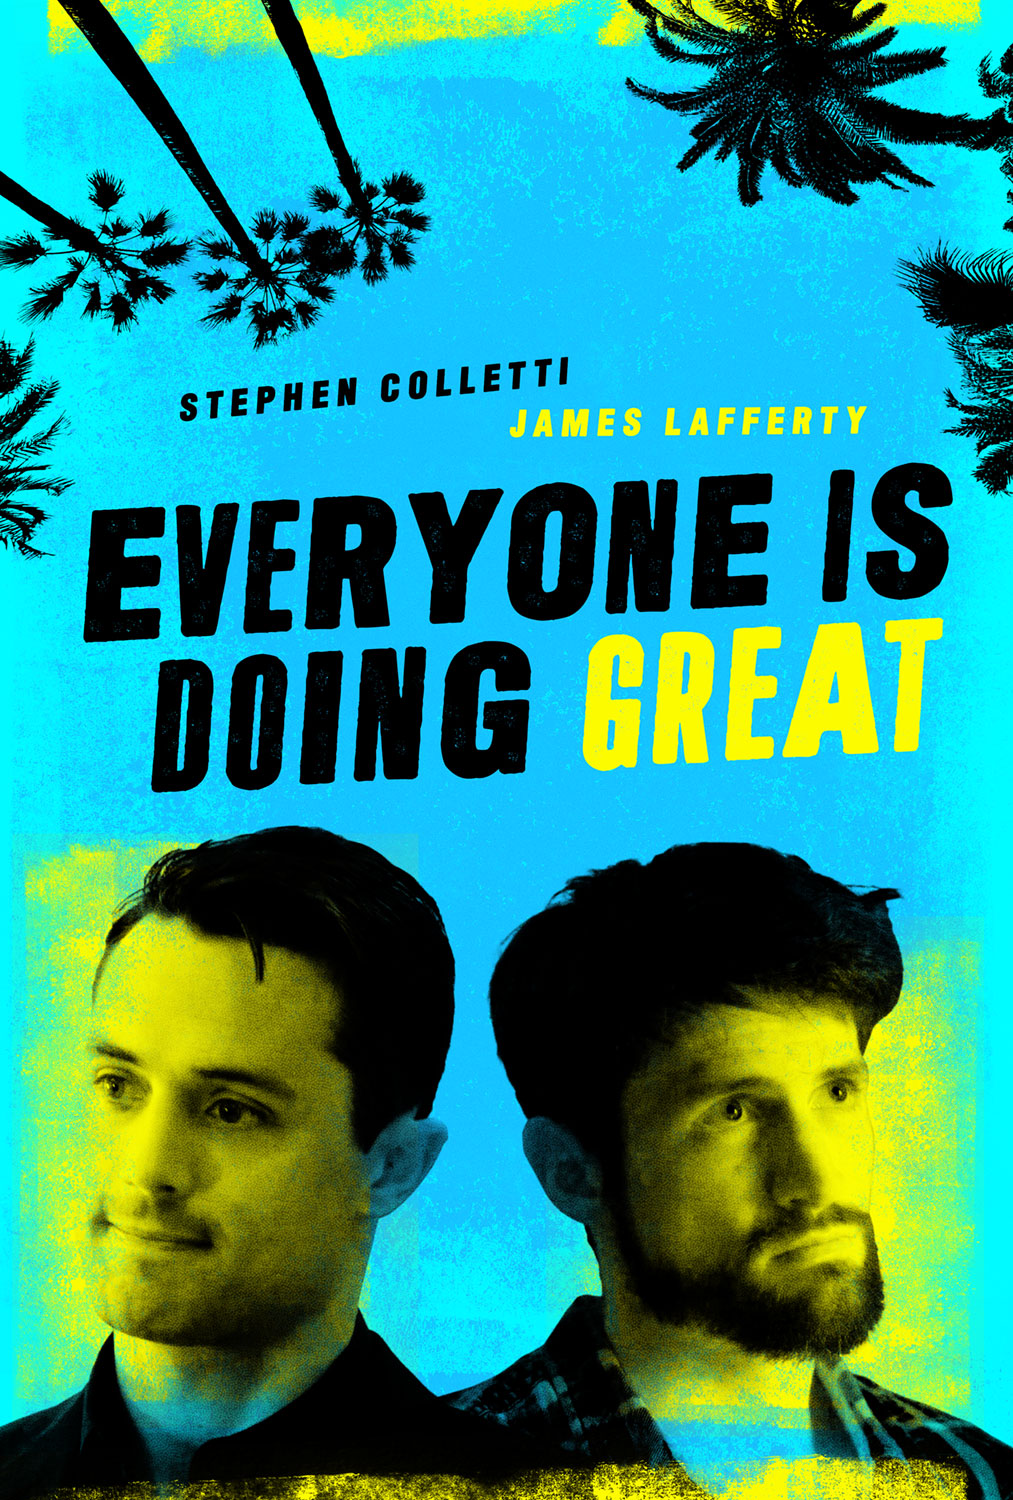 EVERYONE IS DOING GREAT Series Trailer, Images and Poster | The ...